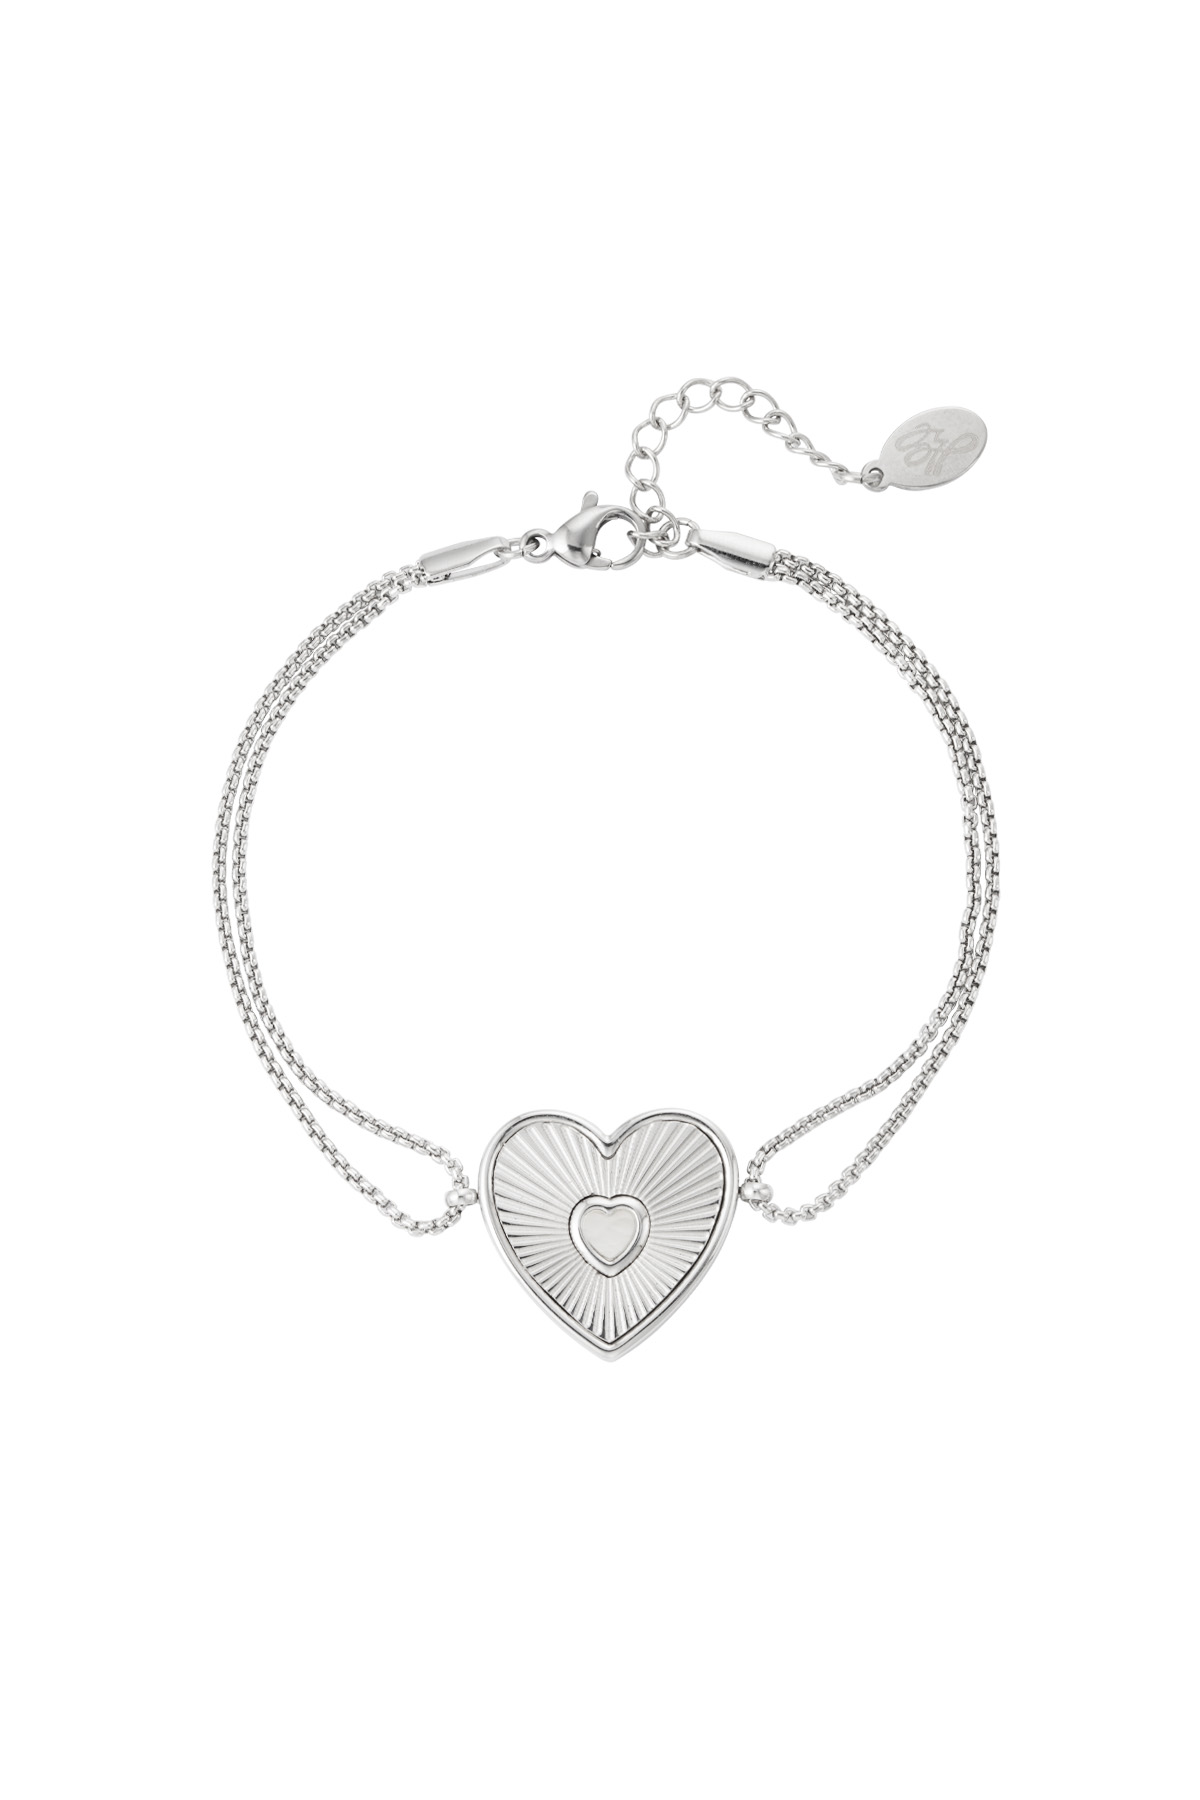 Armband lover heart - zilver h5 